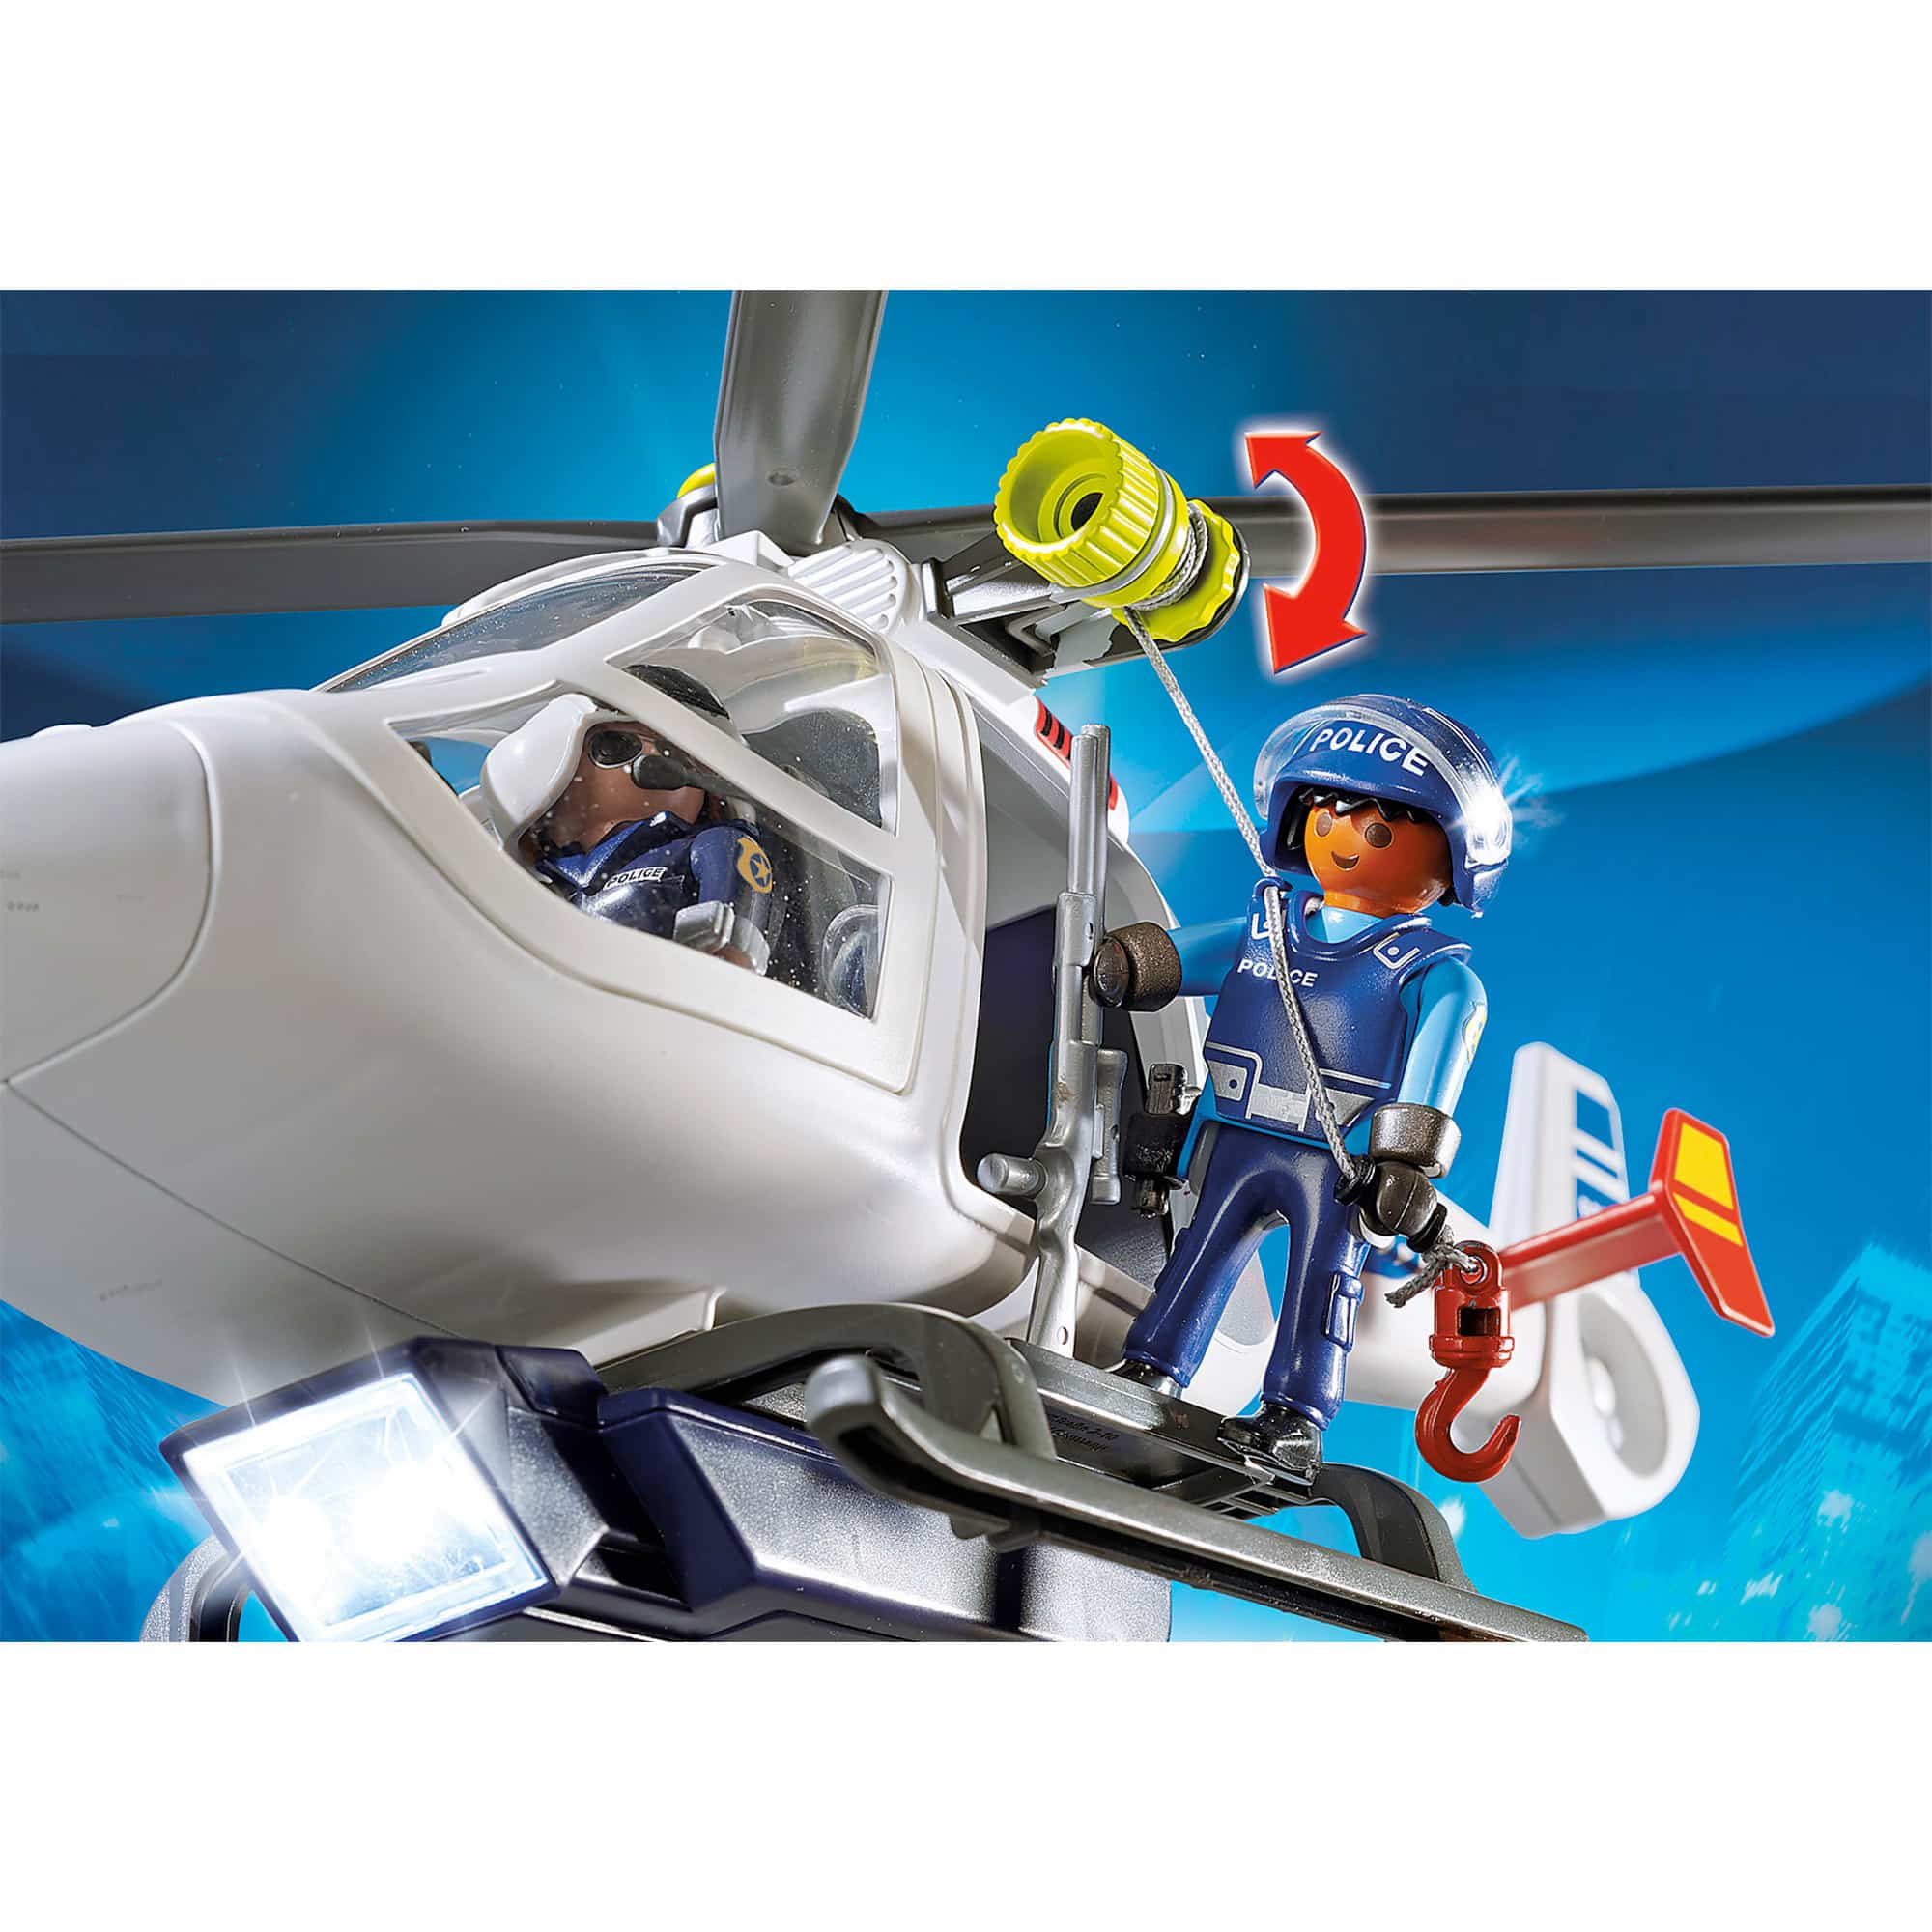 Playmobil - City Action - Police Helicopter with LED Searchlight 6921